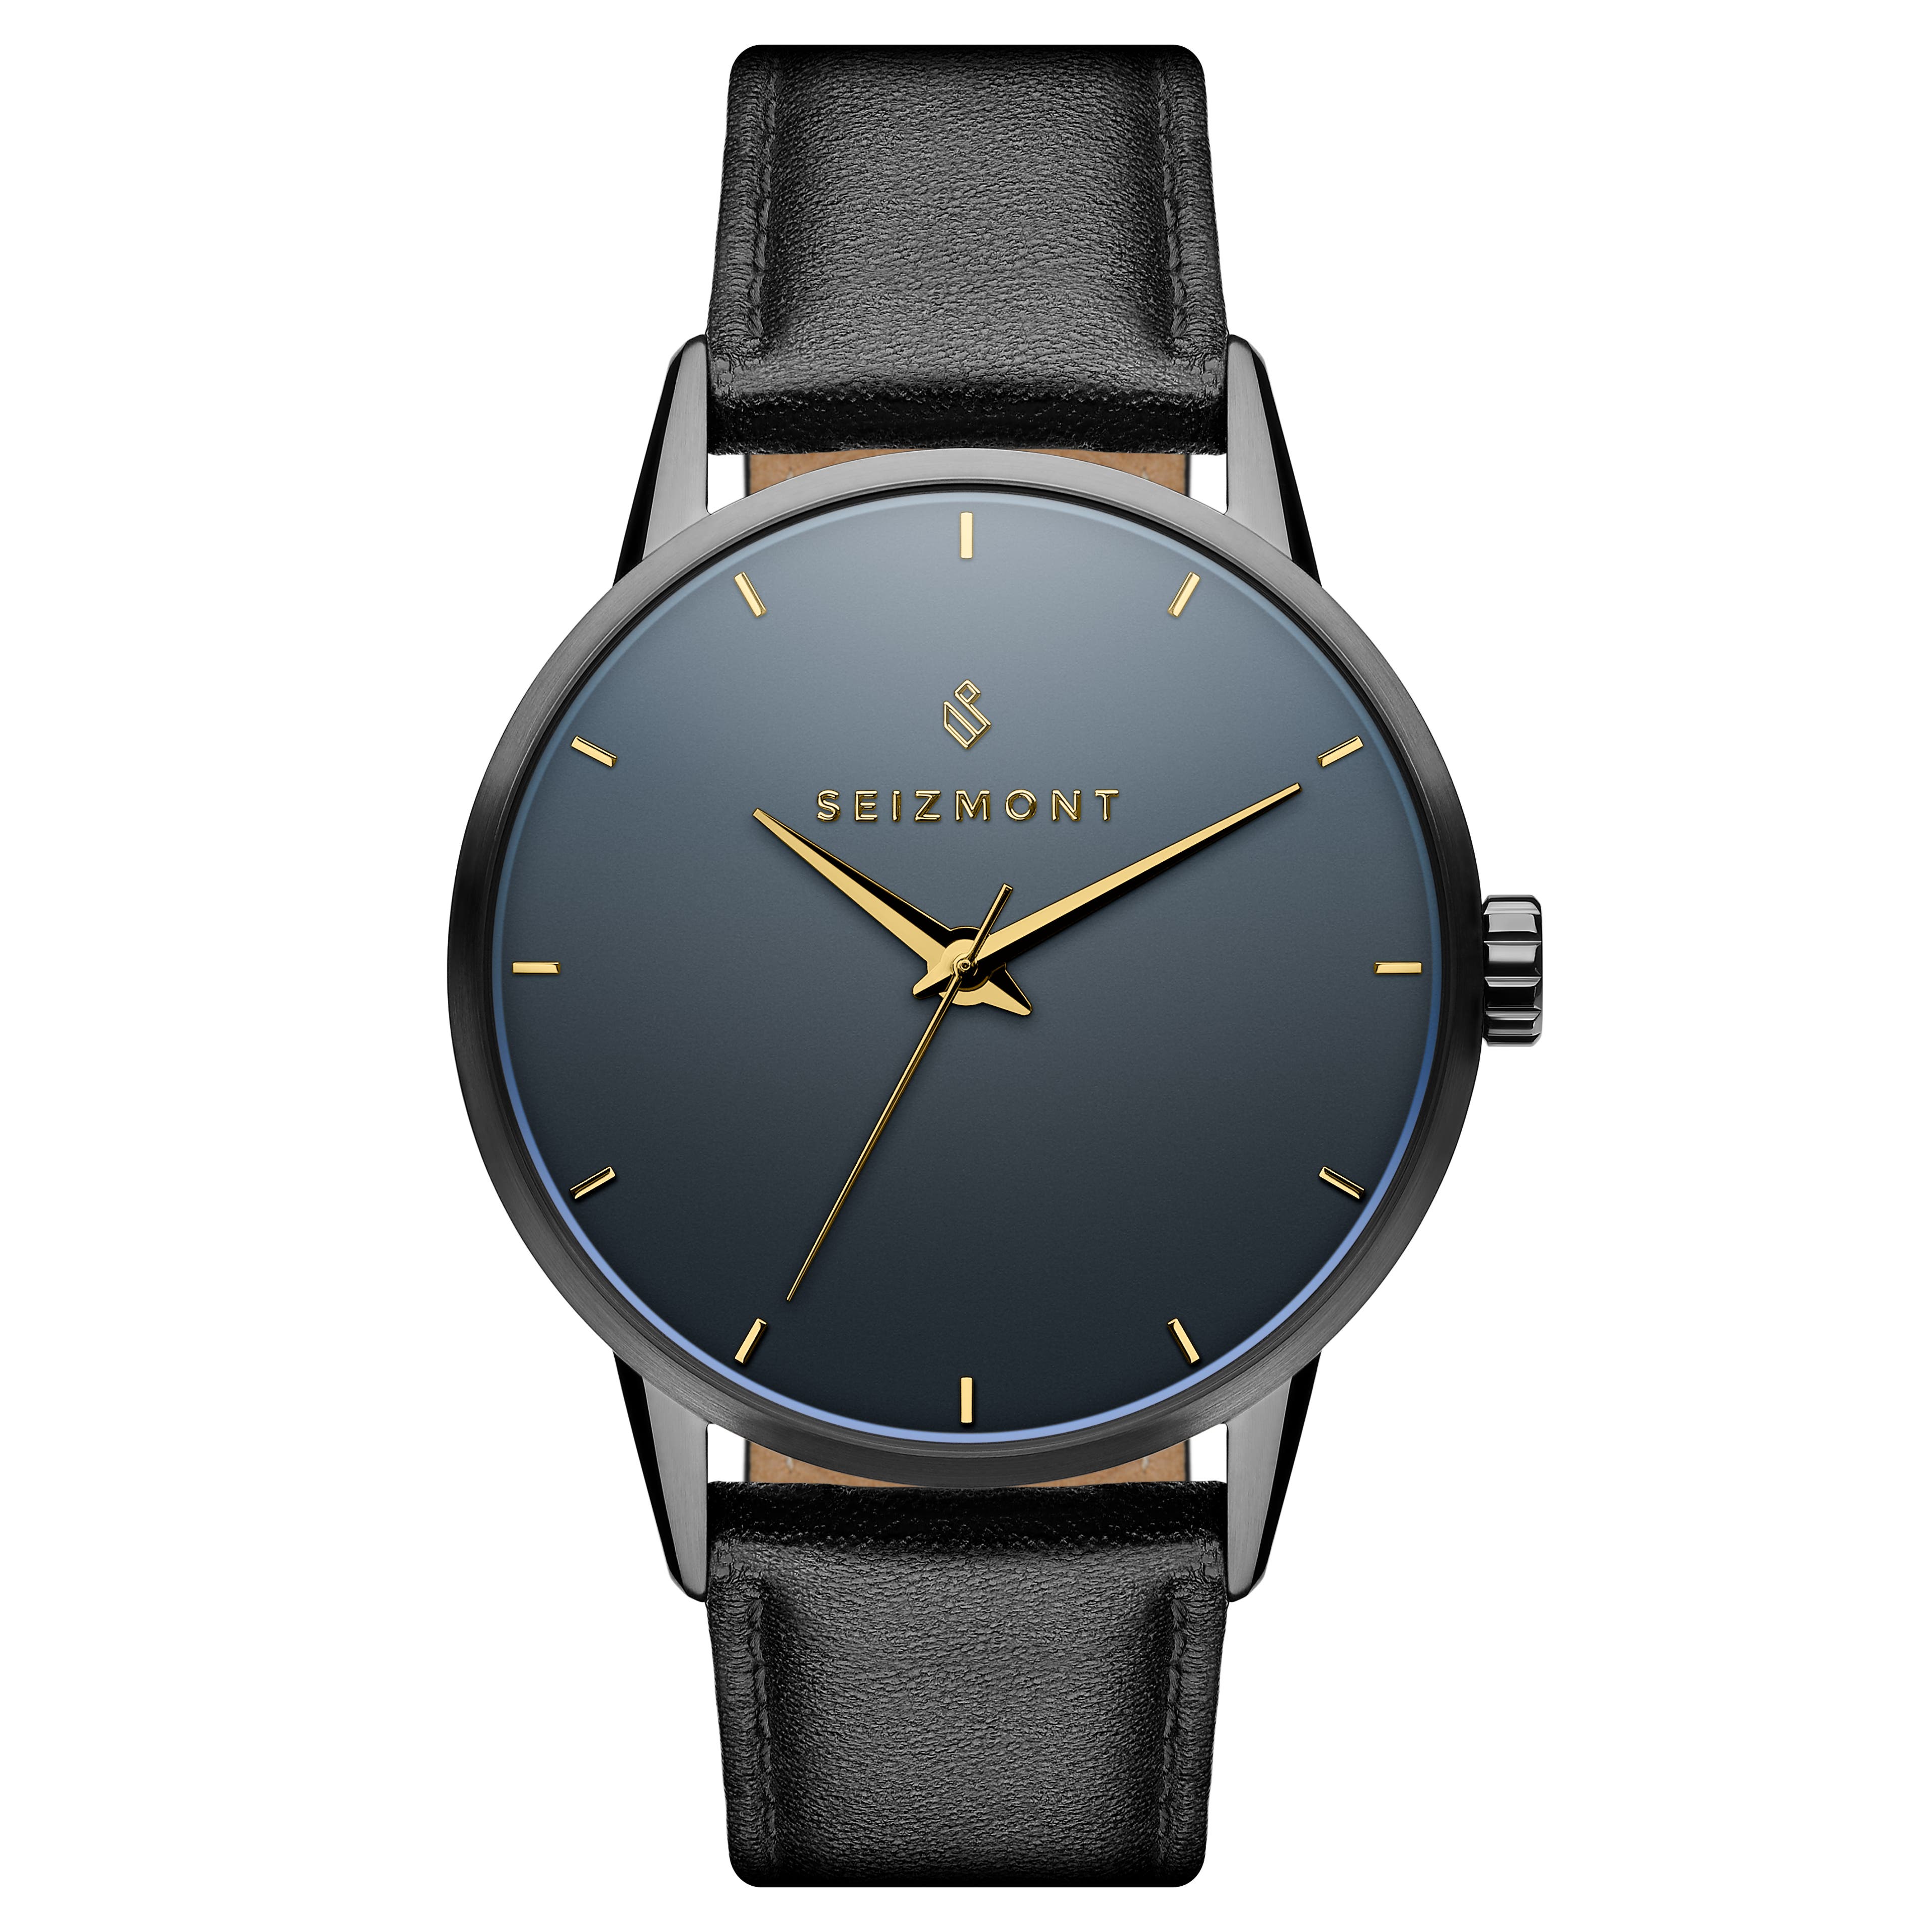 Onknown | Blue Tinted Mirror Glass Leather Watch